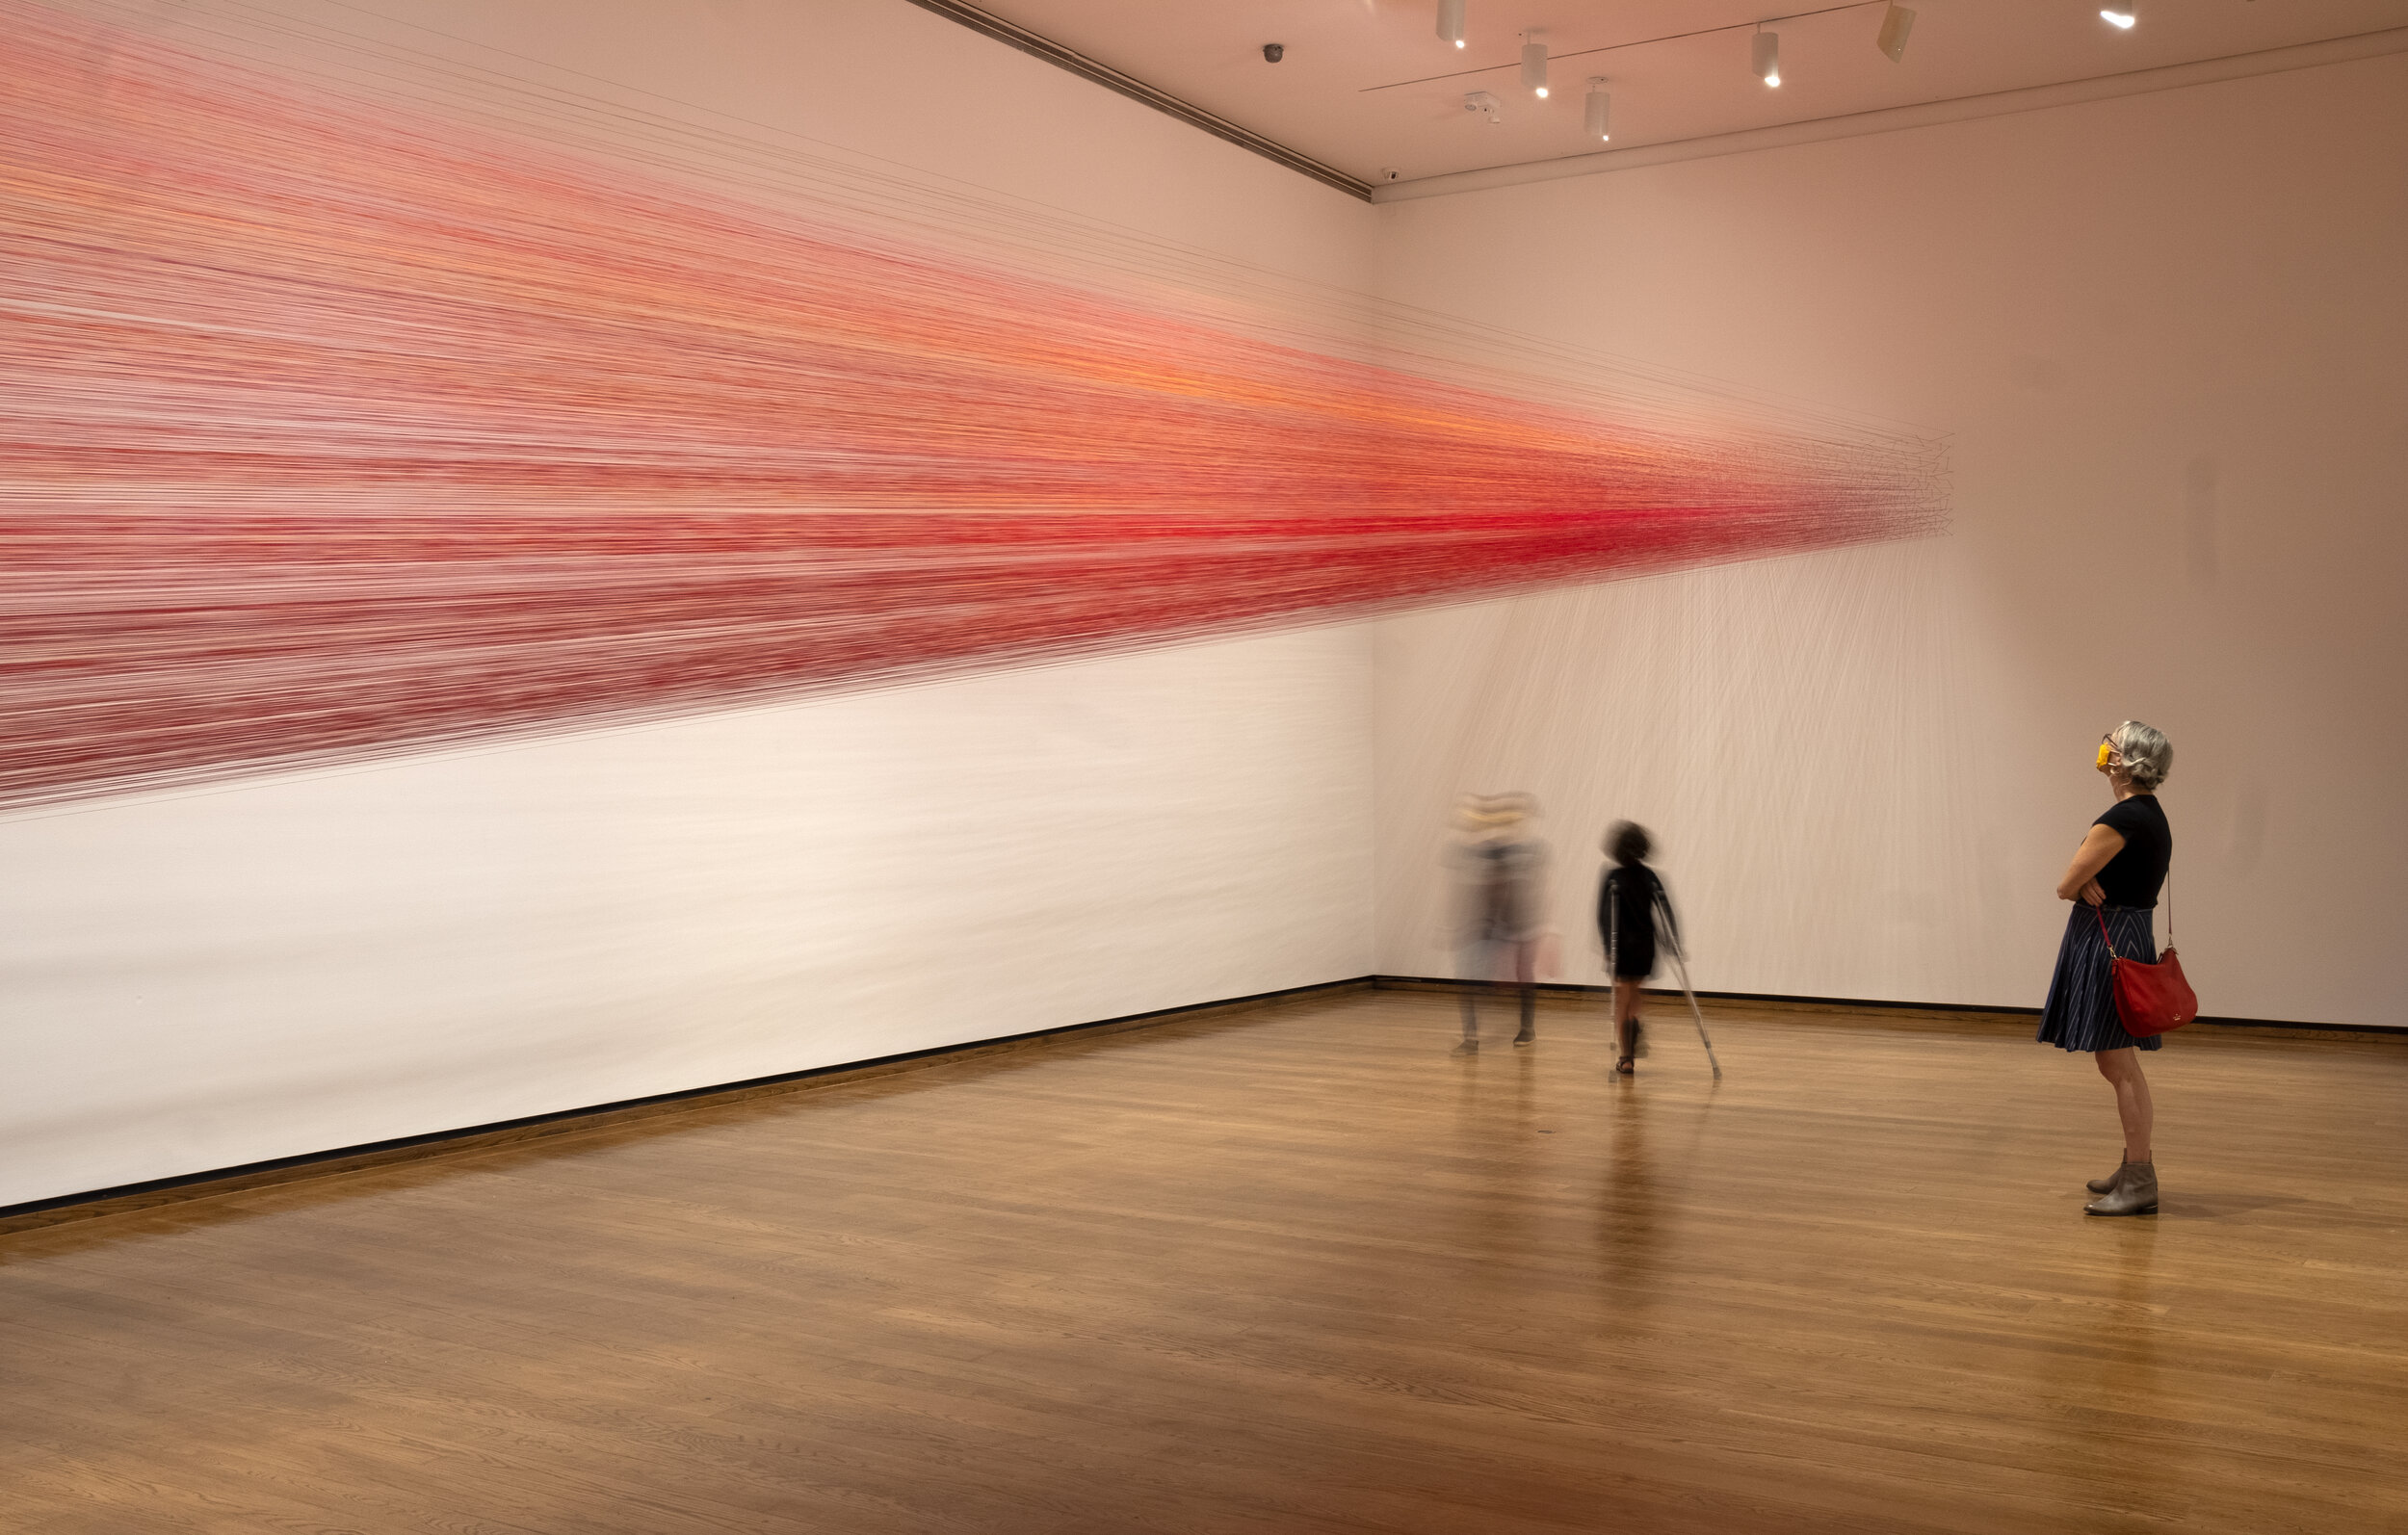    bloodlines   2021 thread and staples 9 x 50 x 9 feet  AbStranded: Fiber and Abstraction in Contemporary Art,  curated by Elizabeth Dunbar Everson Museum of Art, Syracuse, New York photograph by Derek Porter 